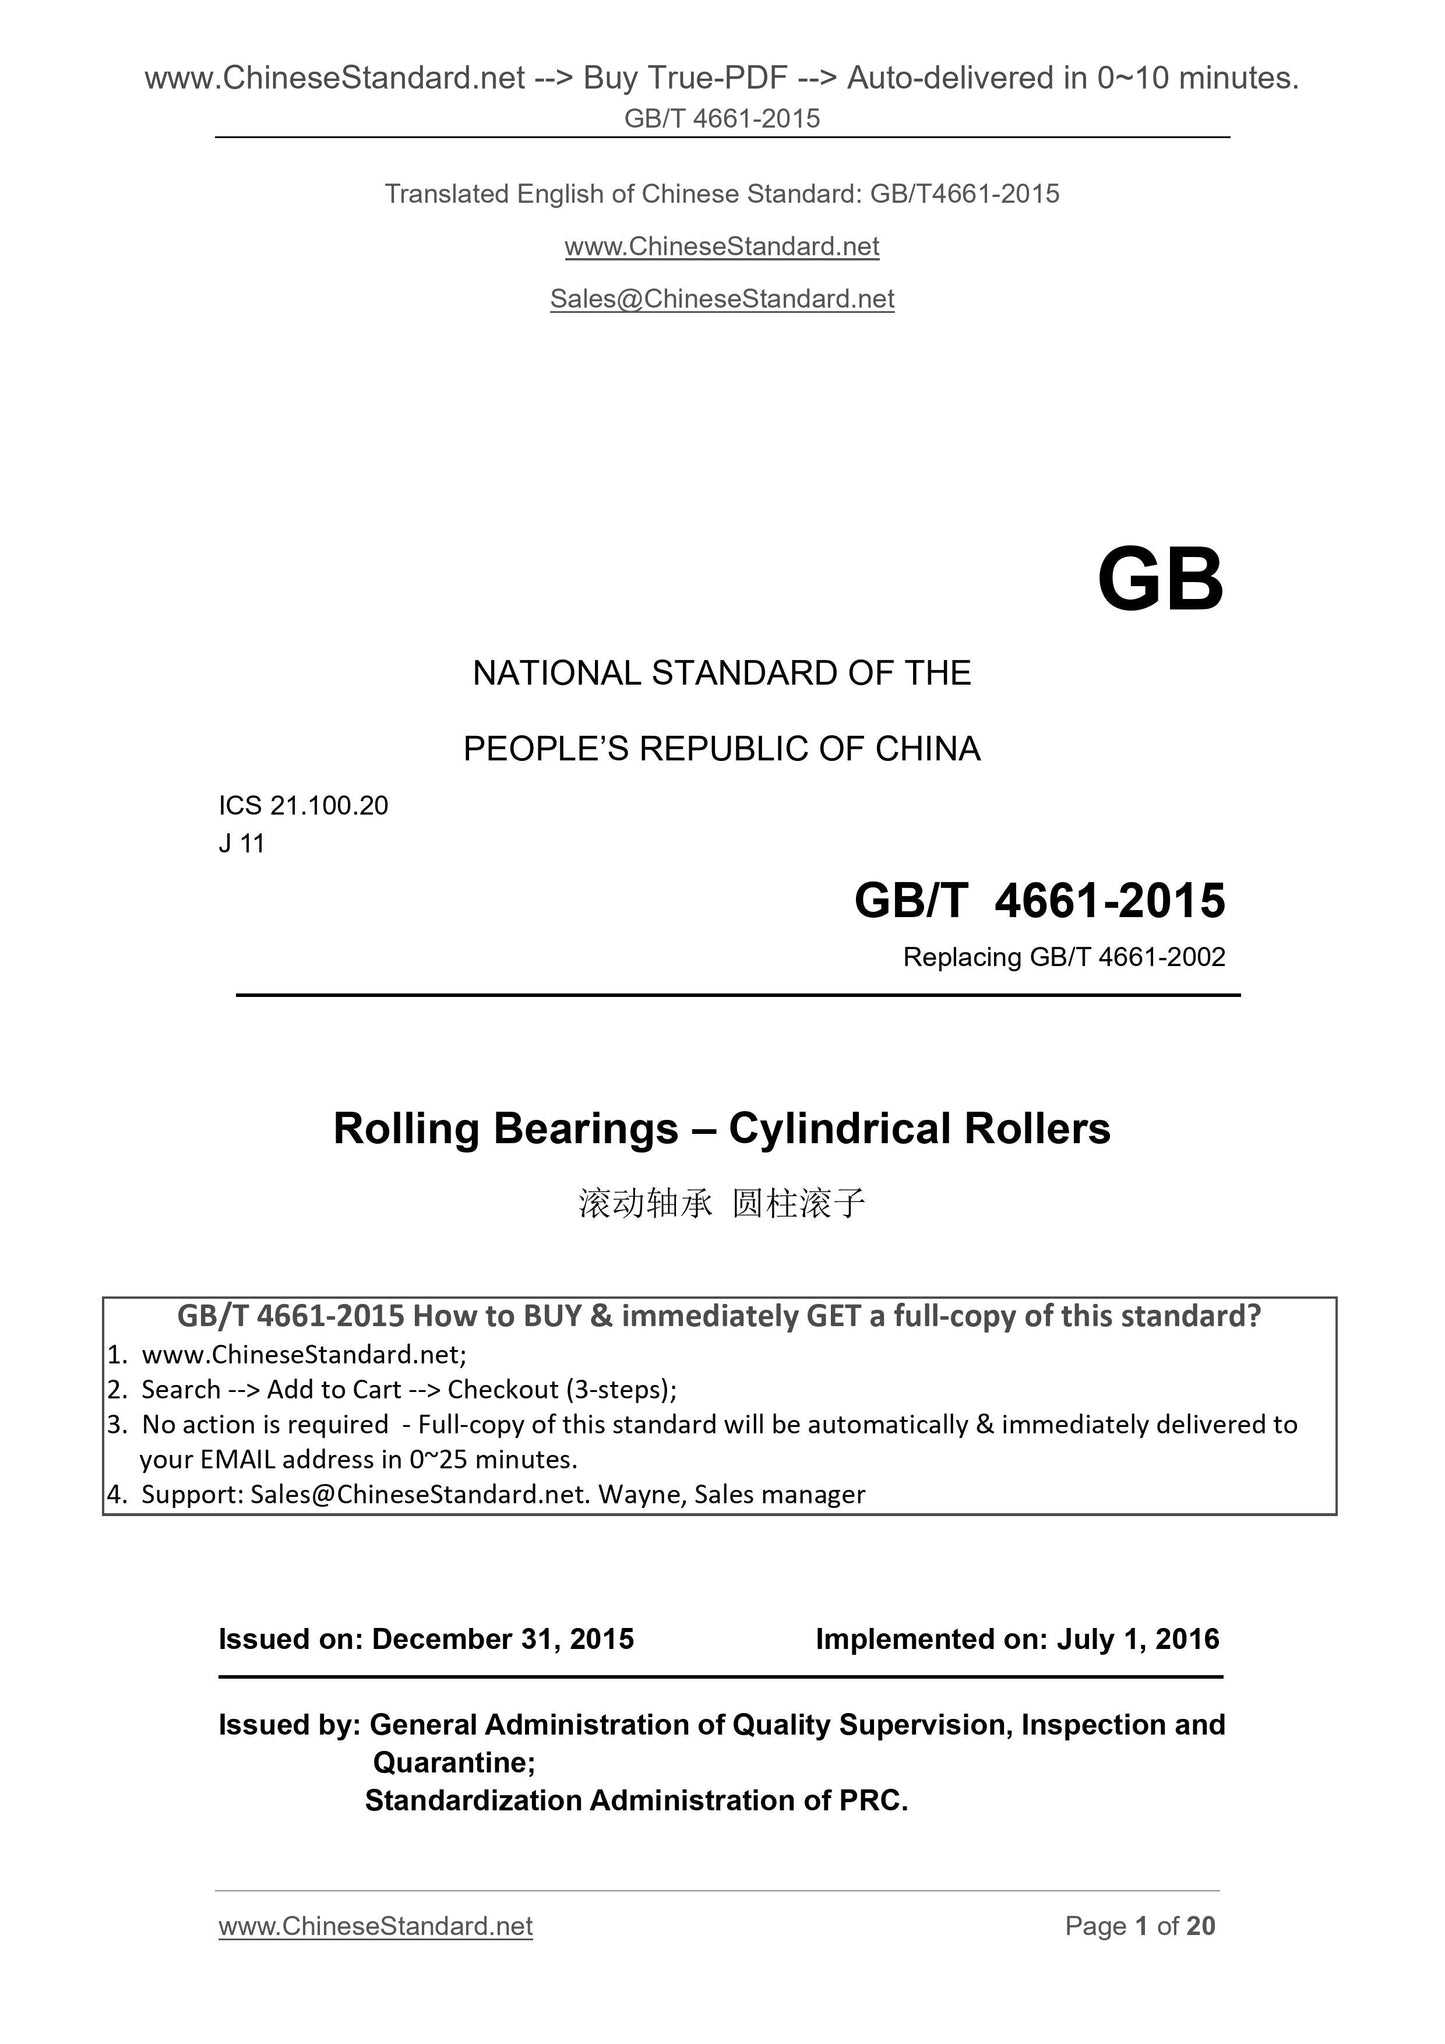 GB/T 4661-2015 Page 1